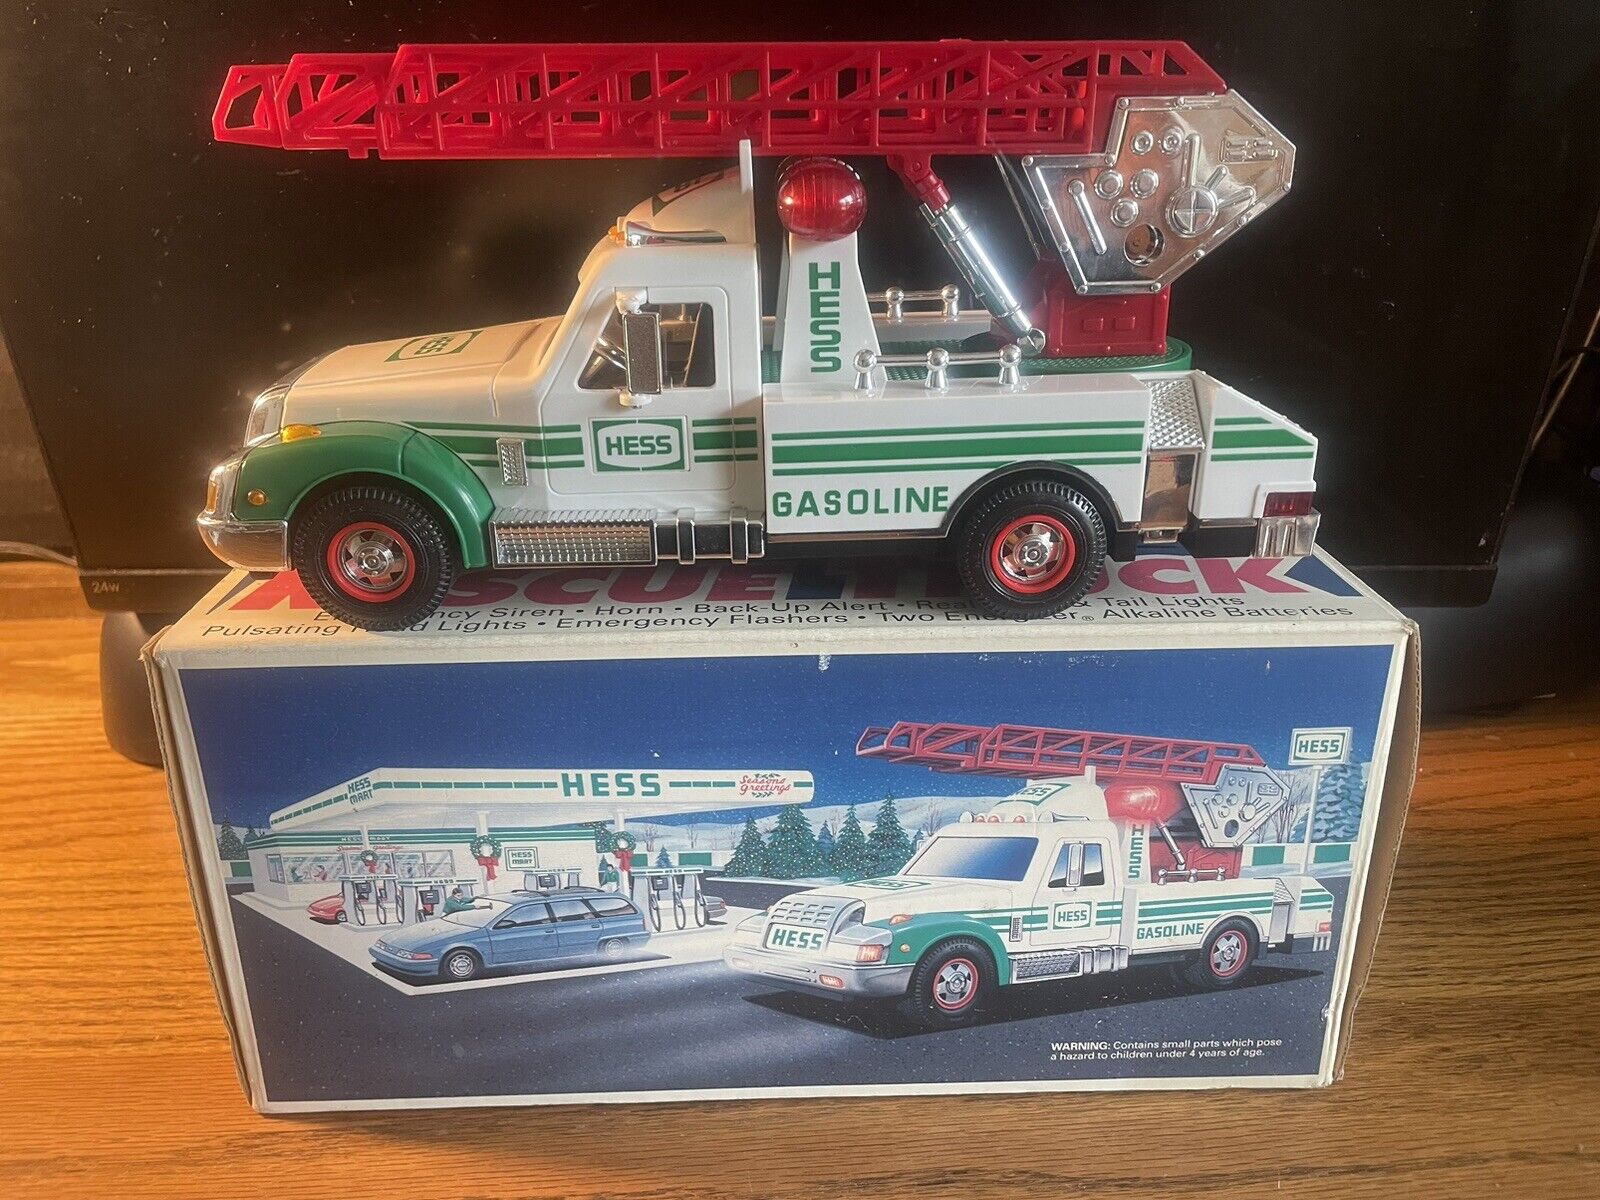 1994 HESS OIL COMPANY RESCUE TRUCK NIB ONLY OPENED FOR PICTURES GREAT REPLICA